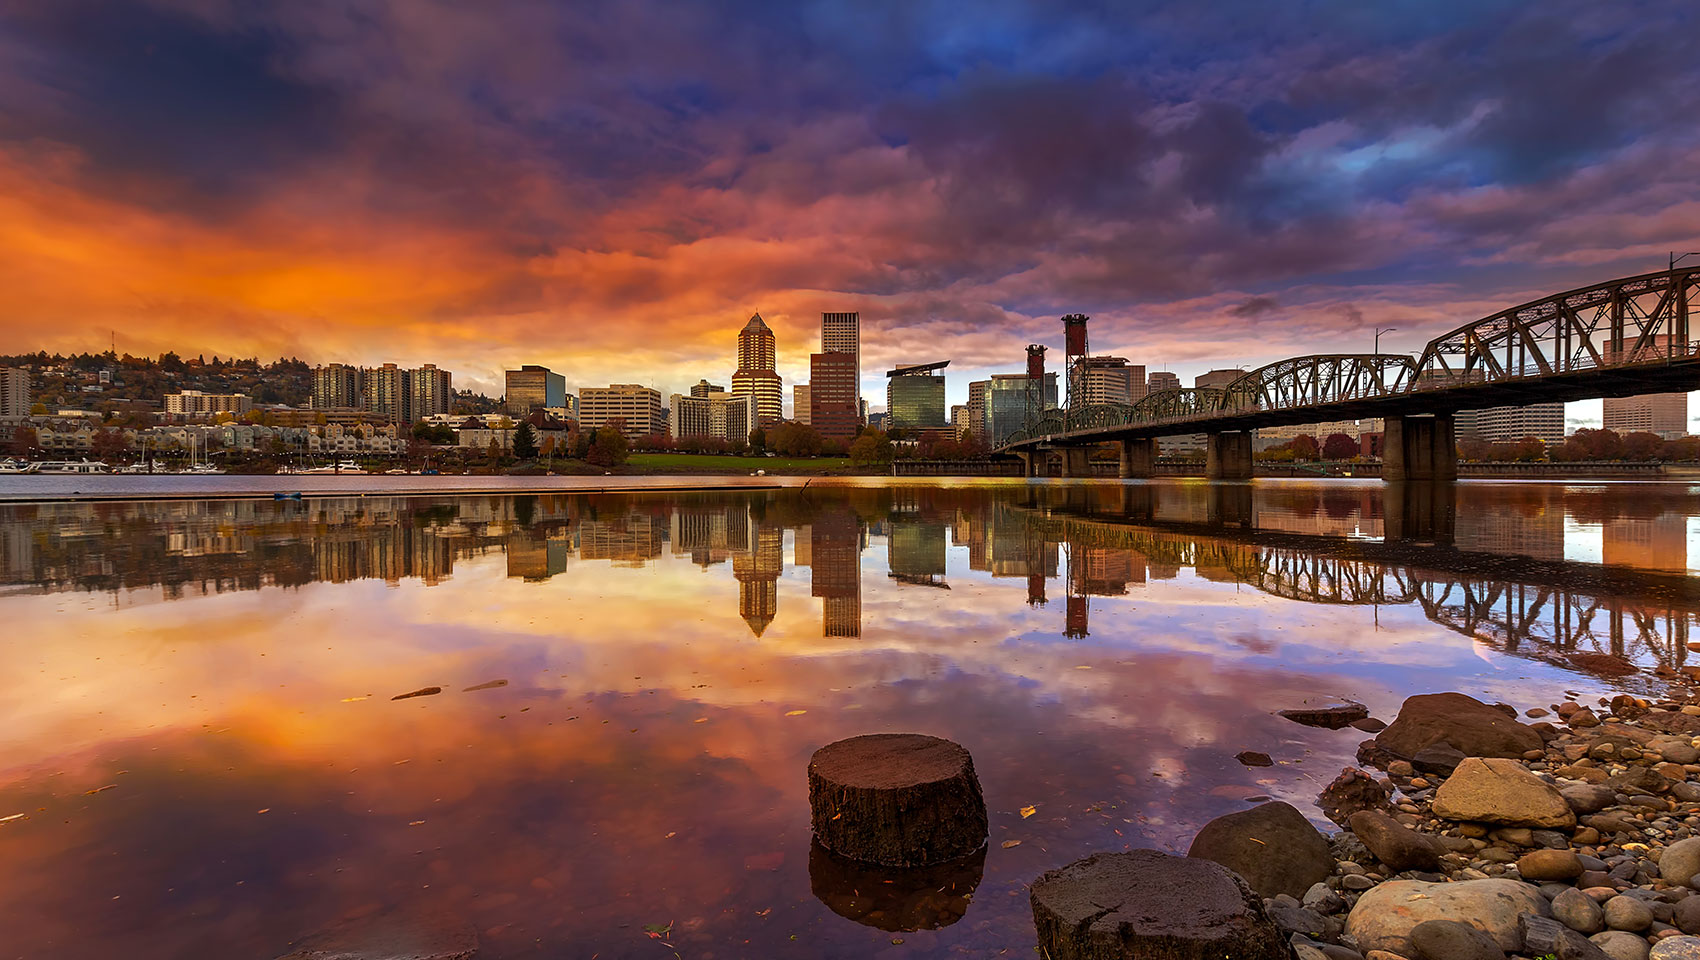 View of Portland from shoreline at dusk